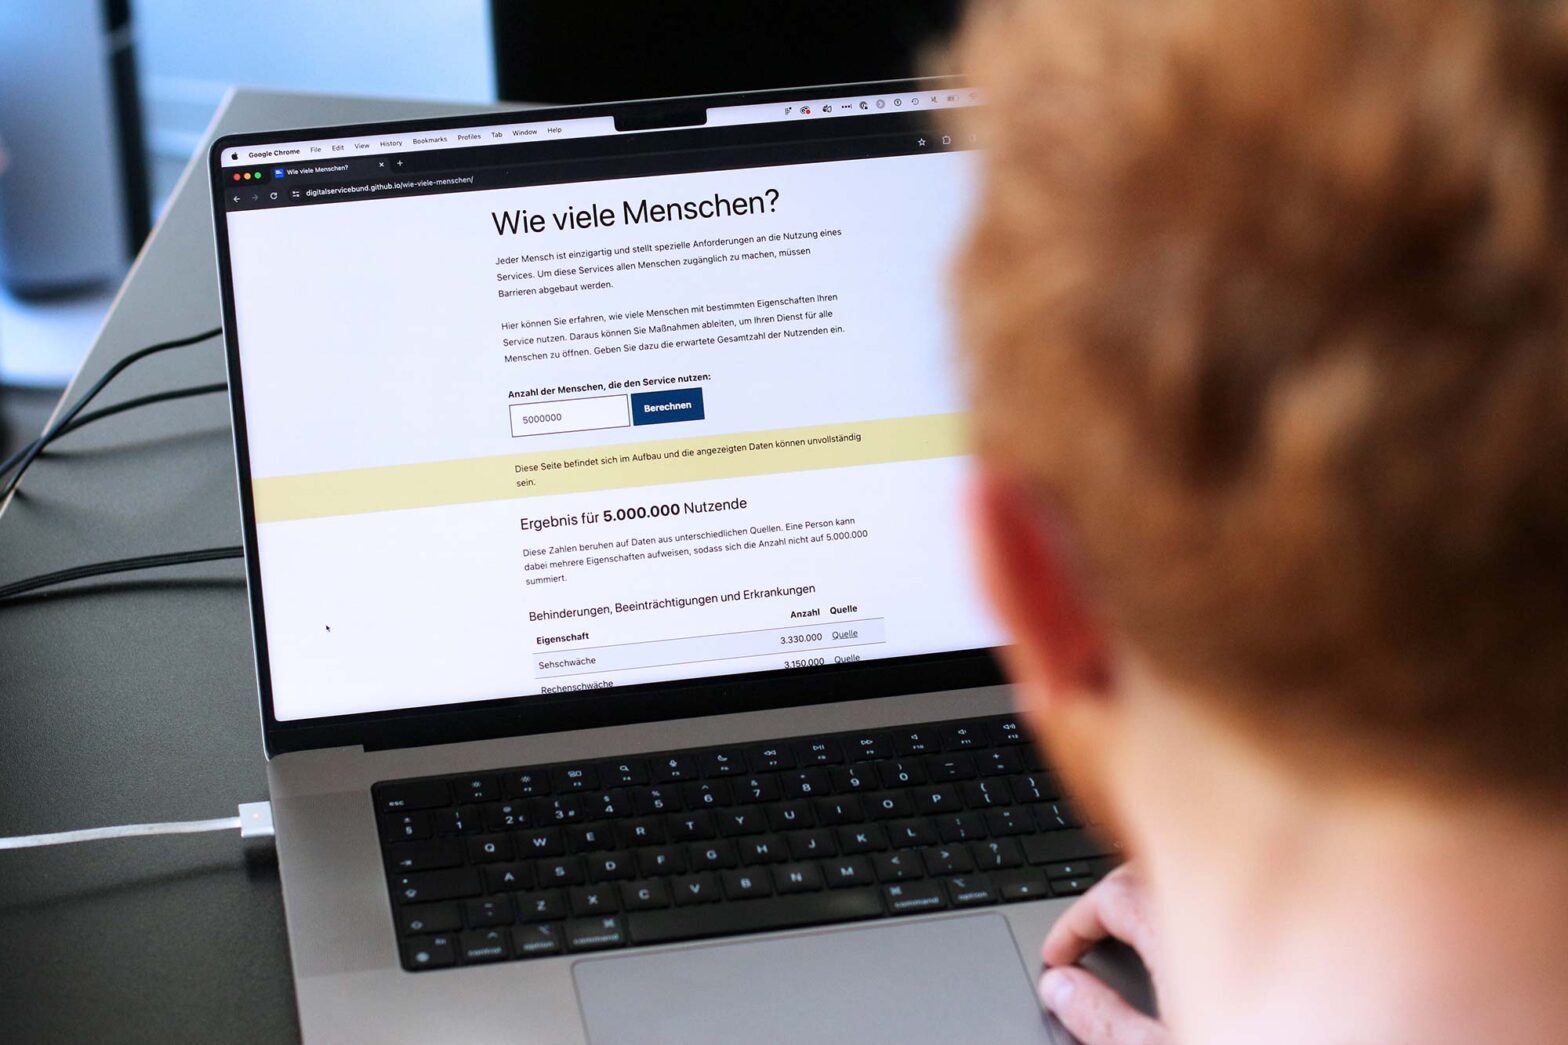 A person with short ginger hair in front of a laptop computer showing a website headlined ‘How many people?’ in German; listing disability and impairments stats for 5 million users